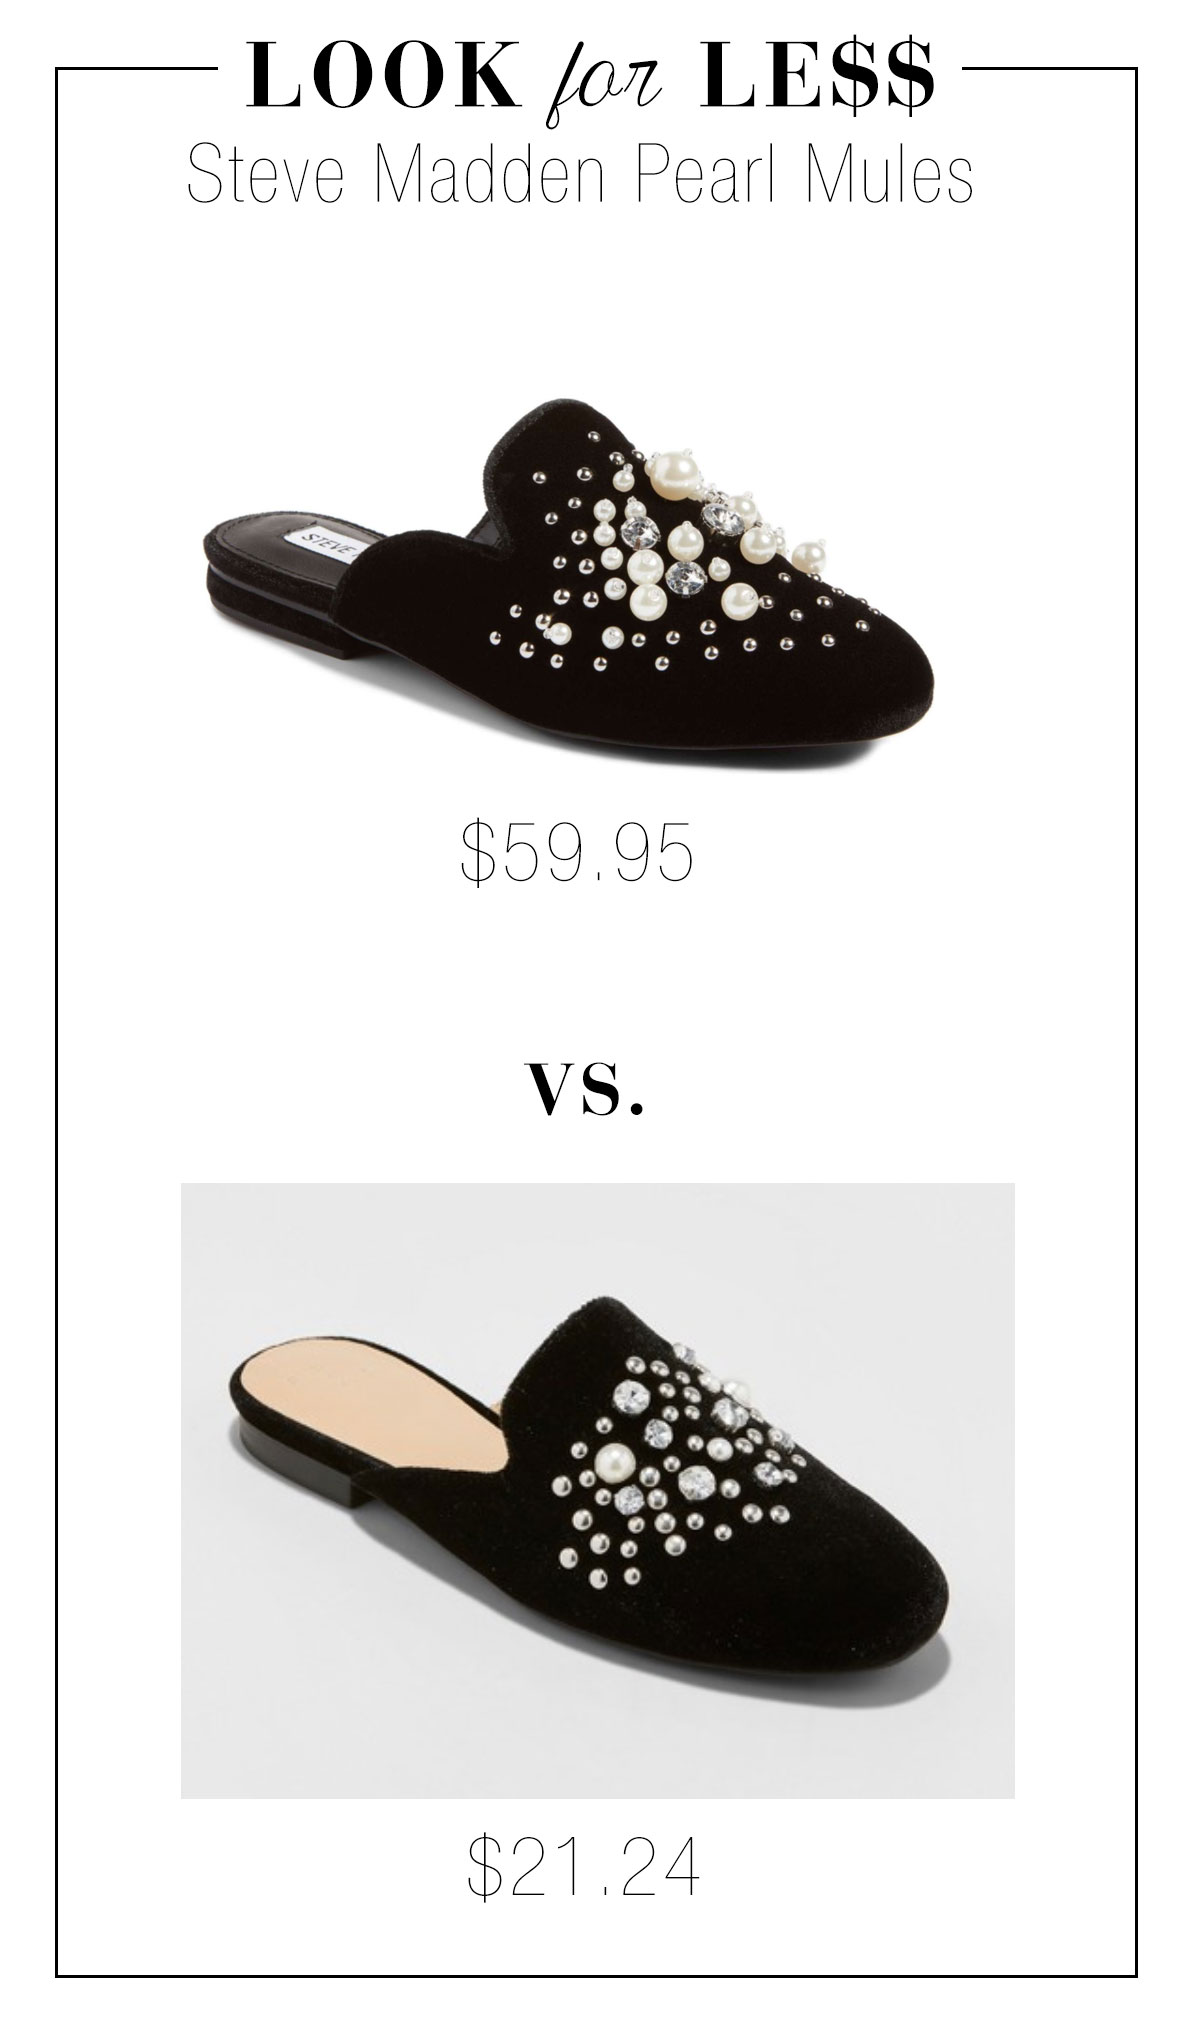 Look for Less: Steve Madden Pearl Mules